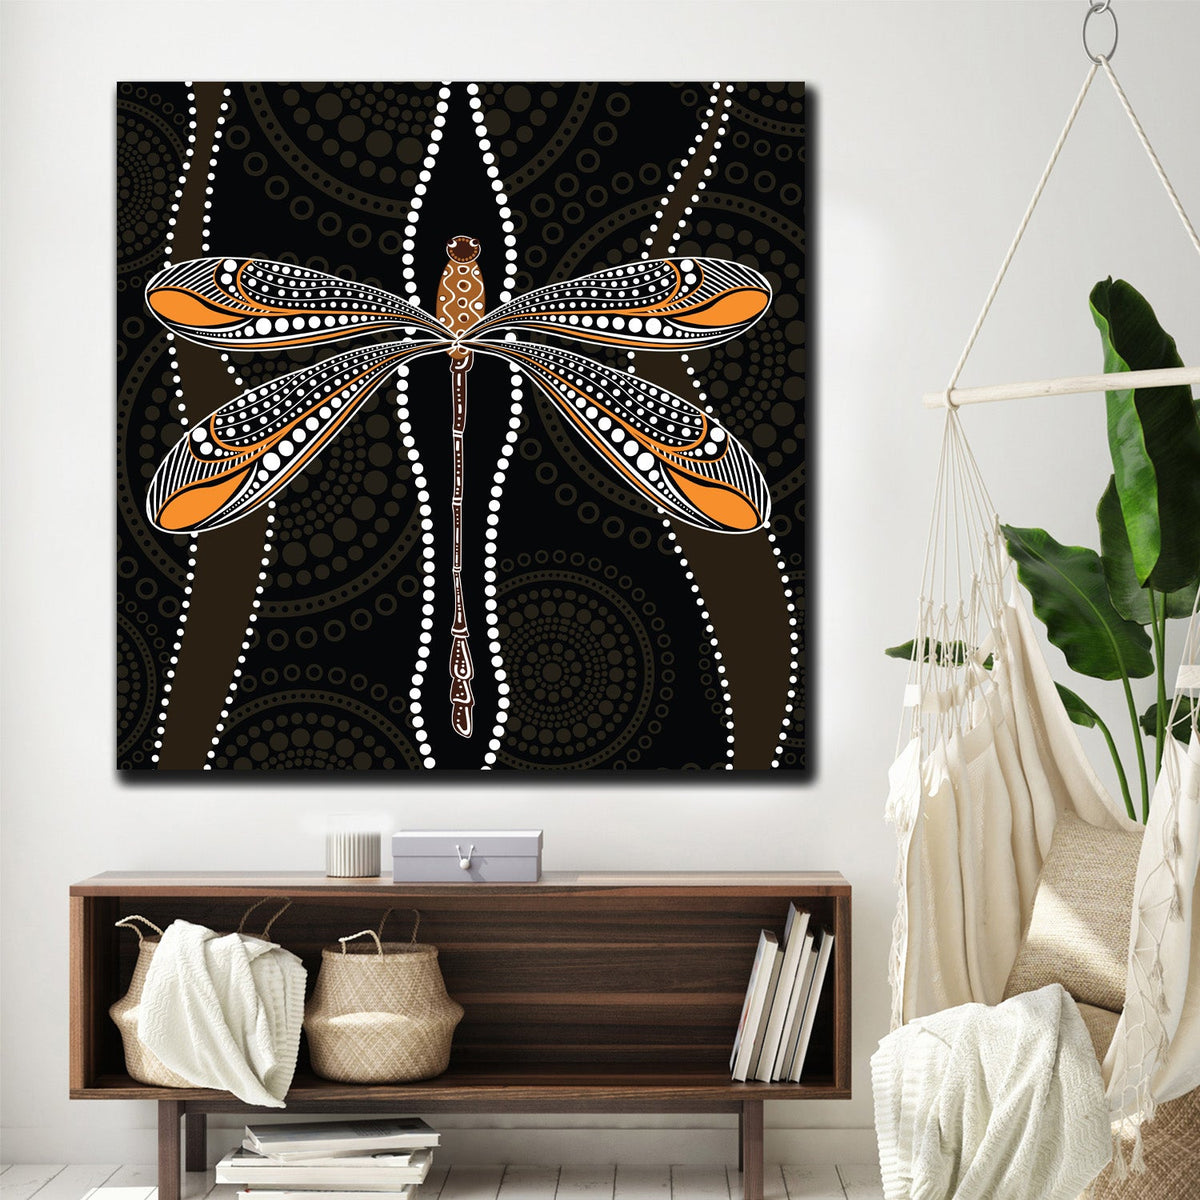 https://cdn.shopify.com/s/files/1/0387/9986/8044/products/DragonflyCanvasArtprintStretched-3.jpg